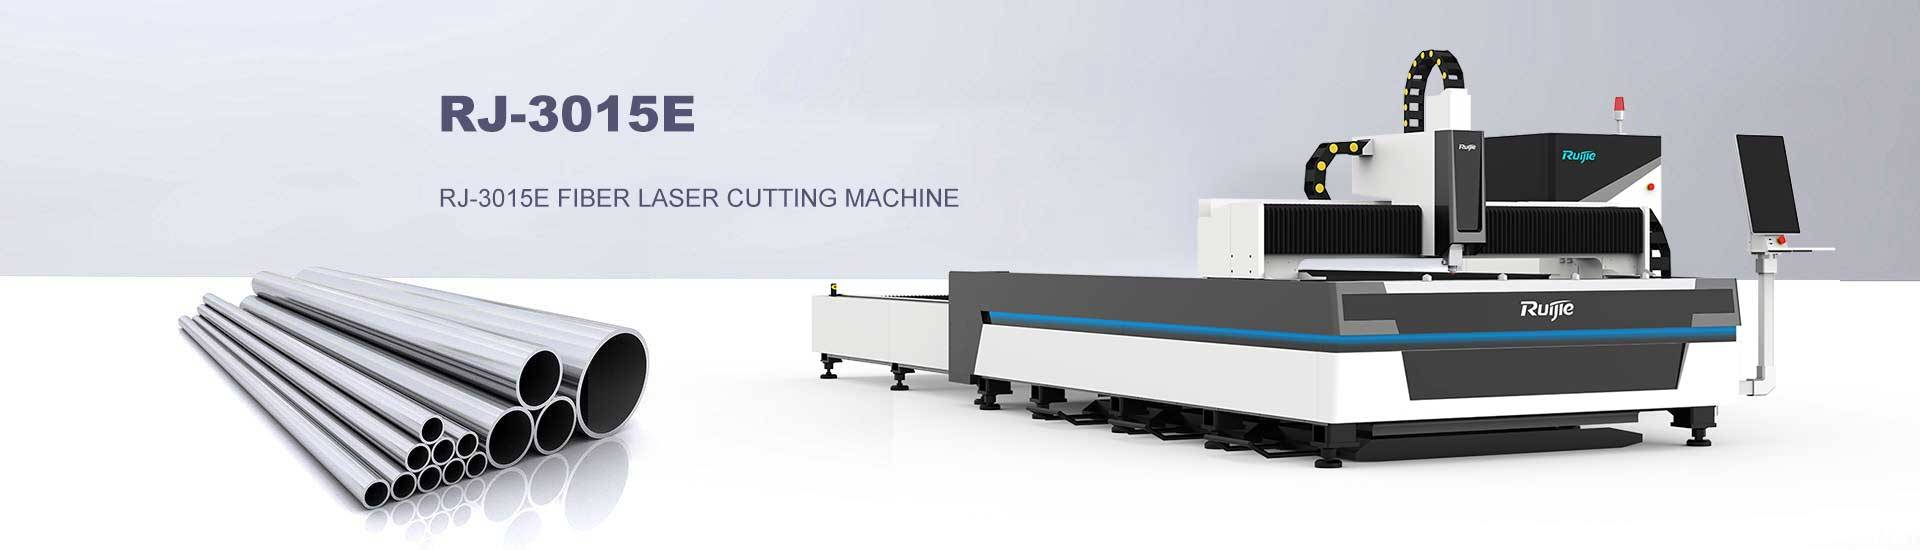 What Are The Advantages Of Laser Cutting – The Advantages Of Fiber Lasers - Digital Journal